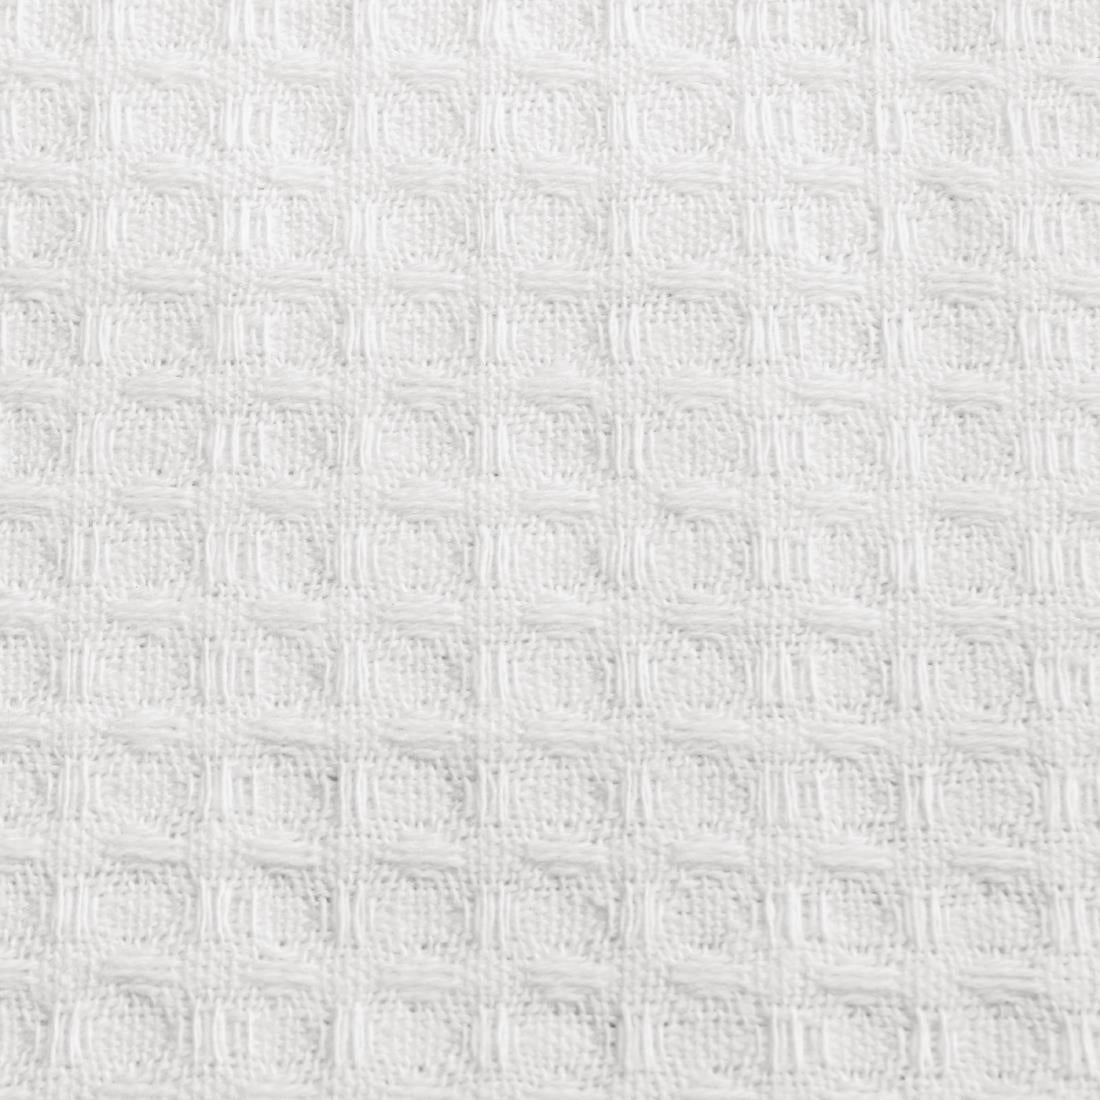 Vogue Cloths White Honeycomb Weave (Pack of 10)